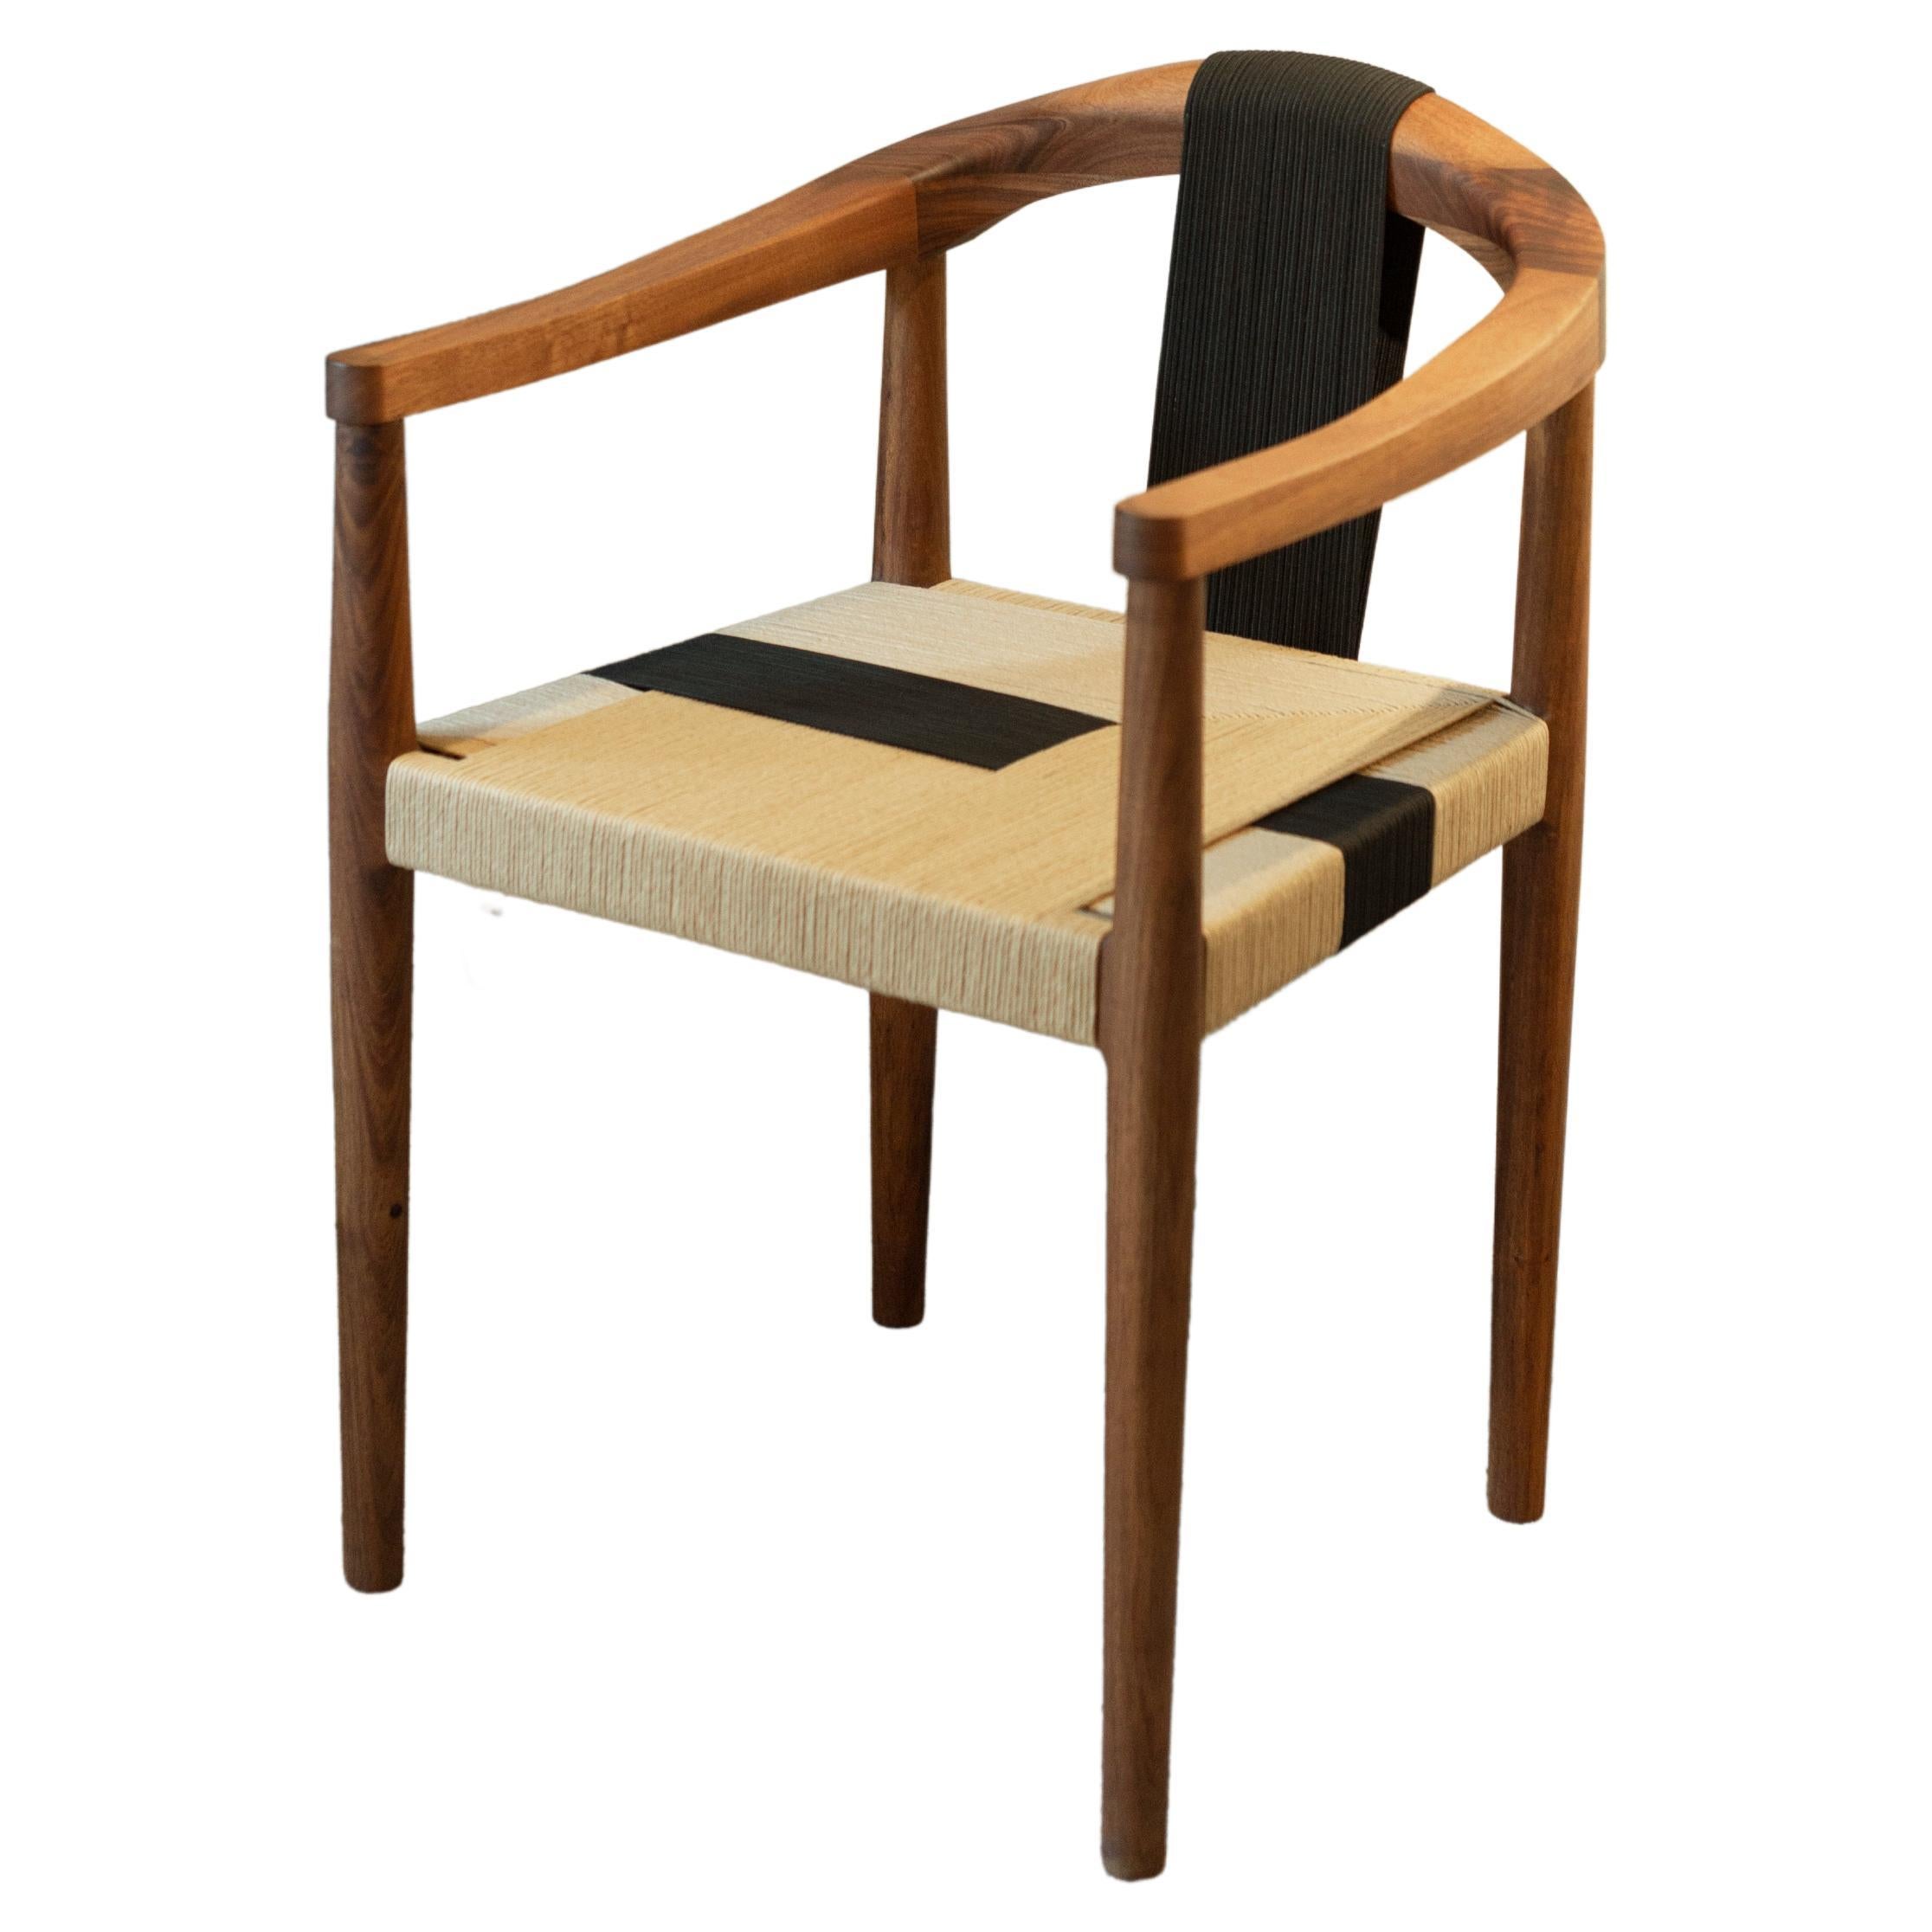 Emma Chair in Tzalam Wood and Paper Cord Weave by Tana Karei